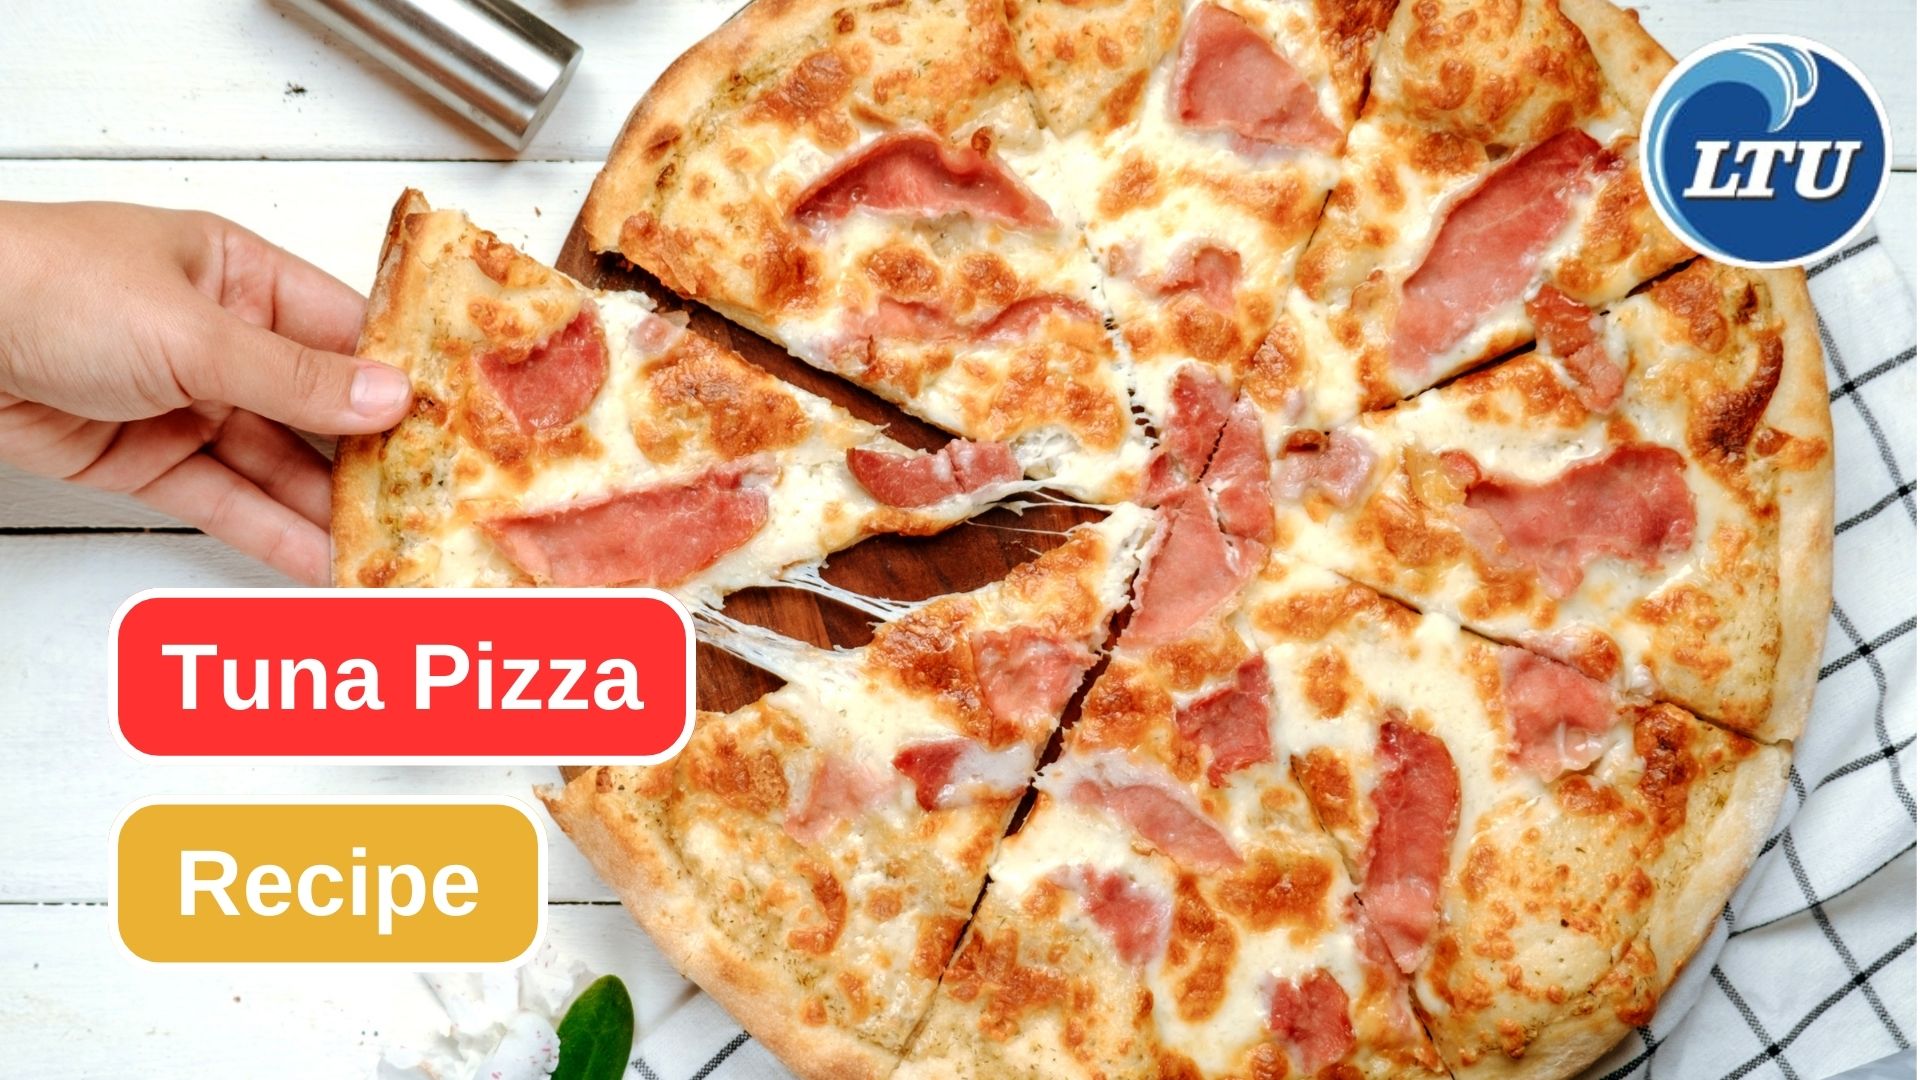 Try This Tuna Pizza Recipe at Home